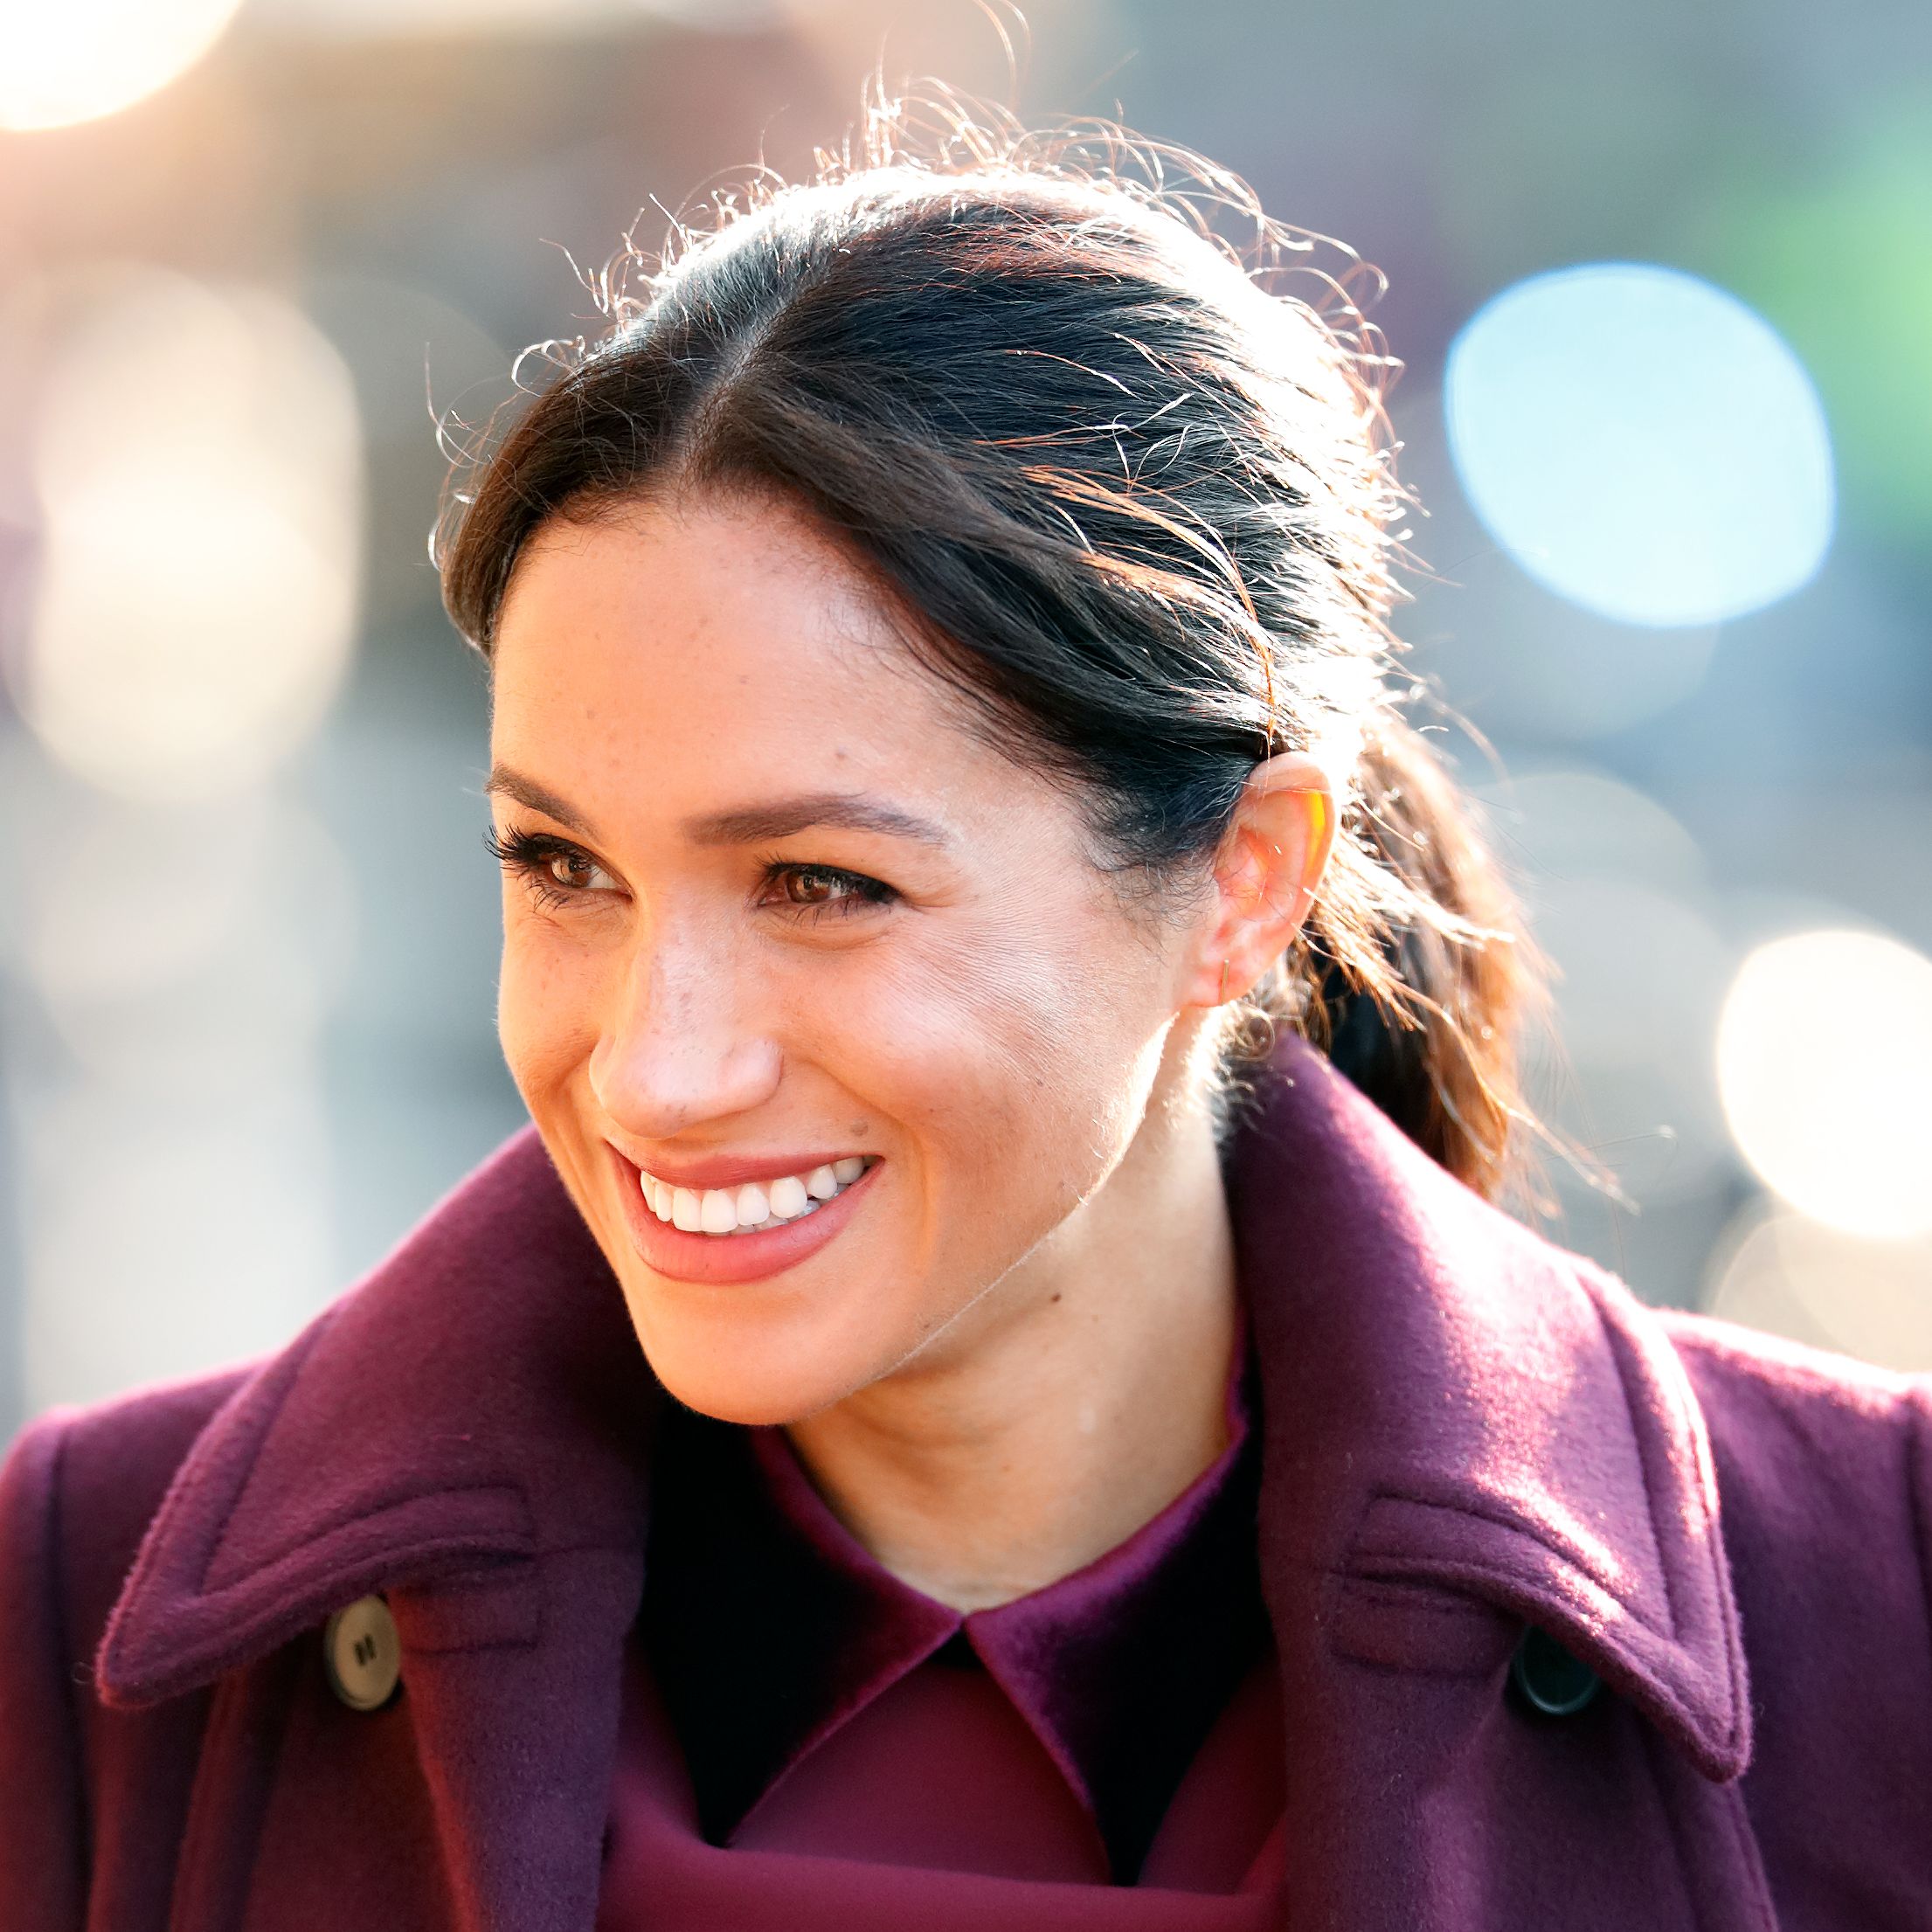 Meghan Markle's New Year's Resolutions Have Been Revealed